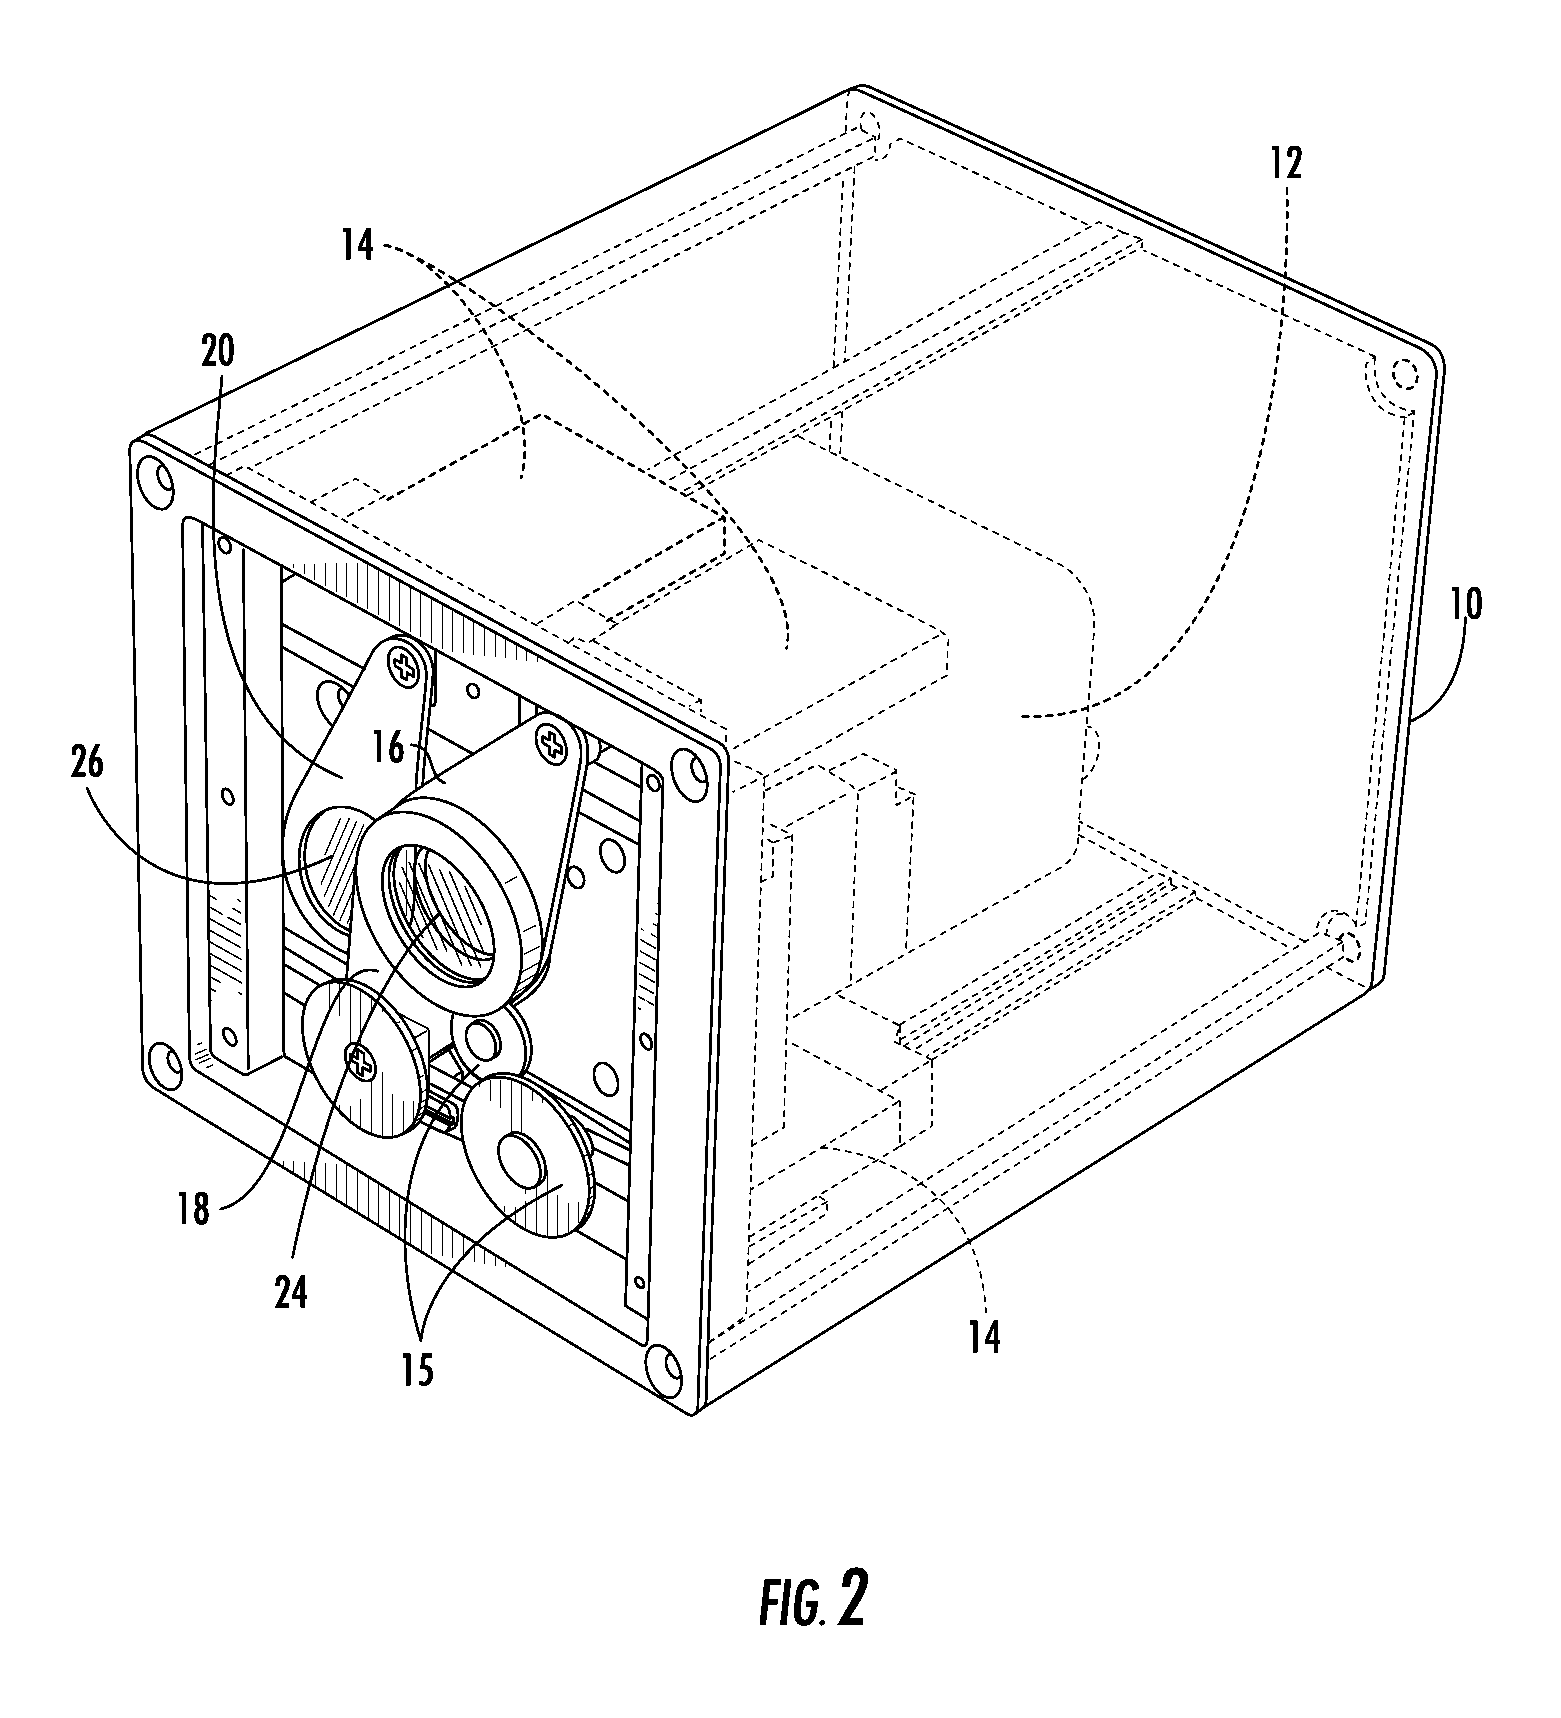 Filter assembly and image enhancement system for a surveillance camera and method of using the same